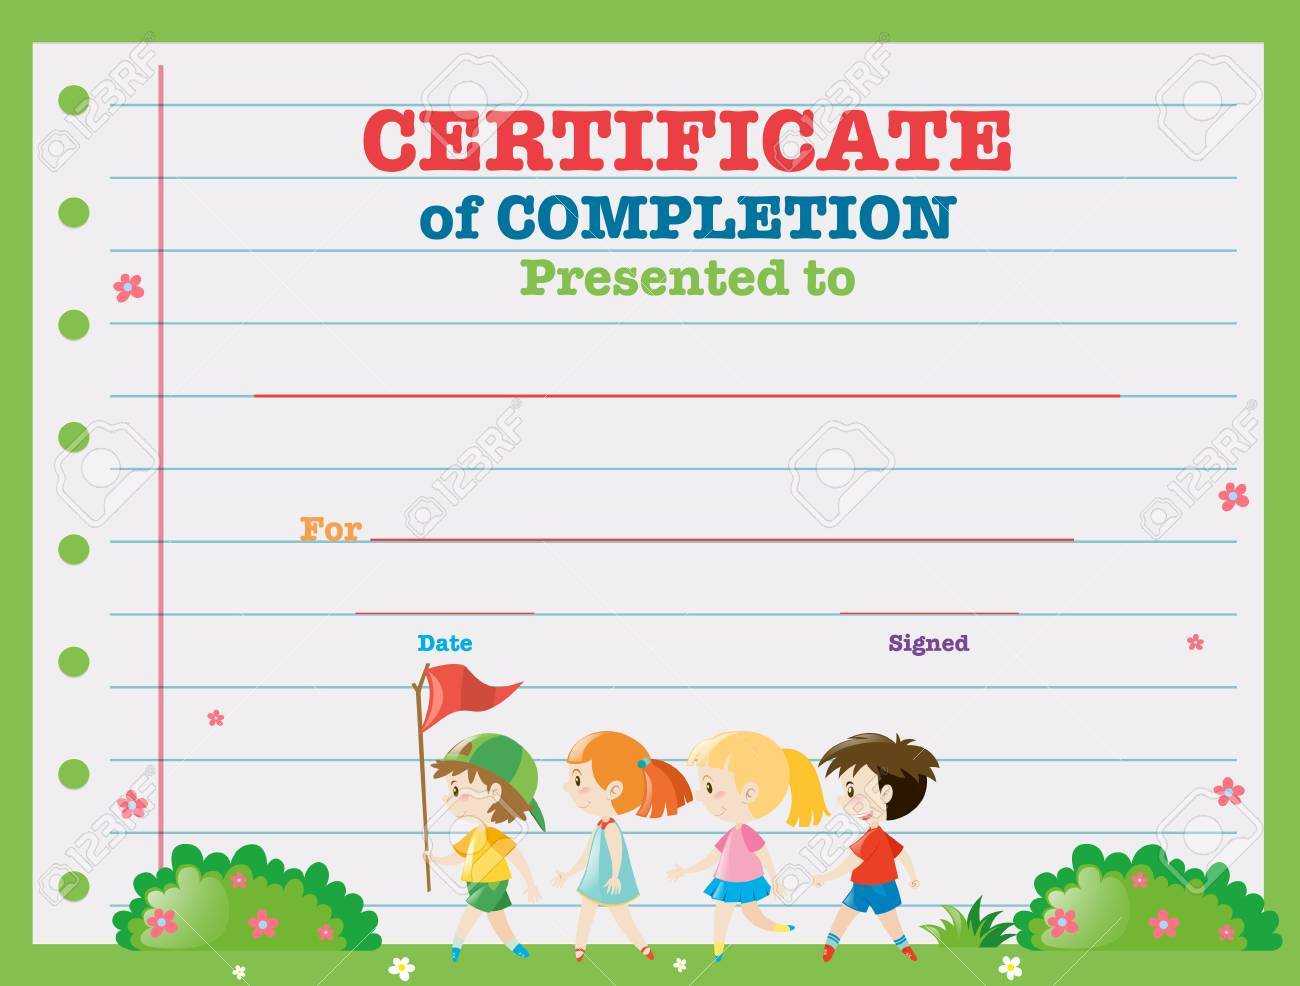 Certificate Template With Kids Walking In The Park Illustration With Regard To Walking Certificate Templates